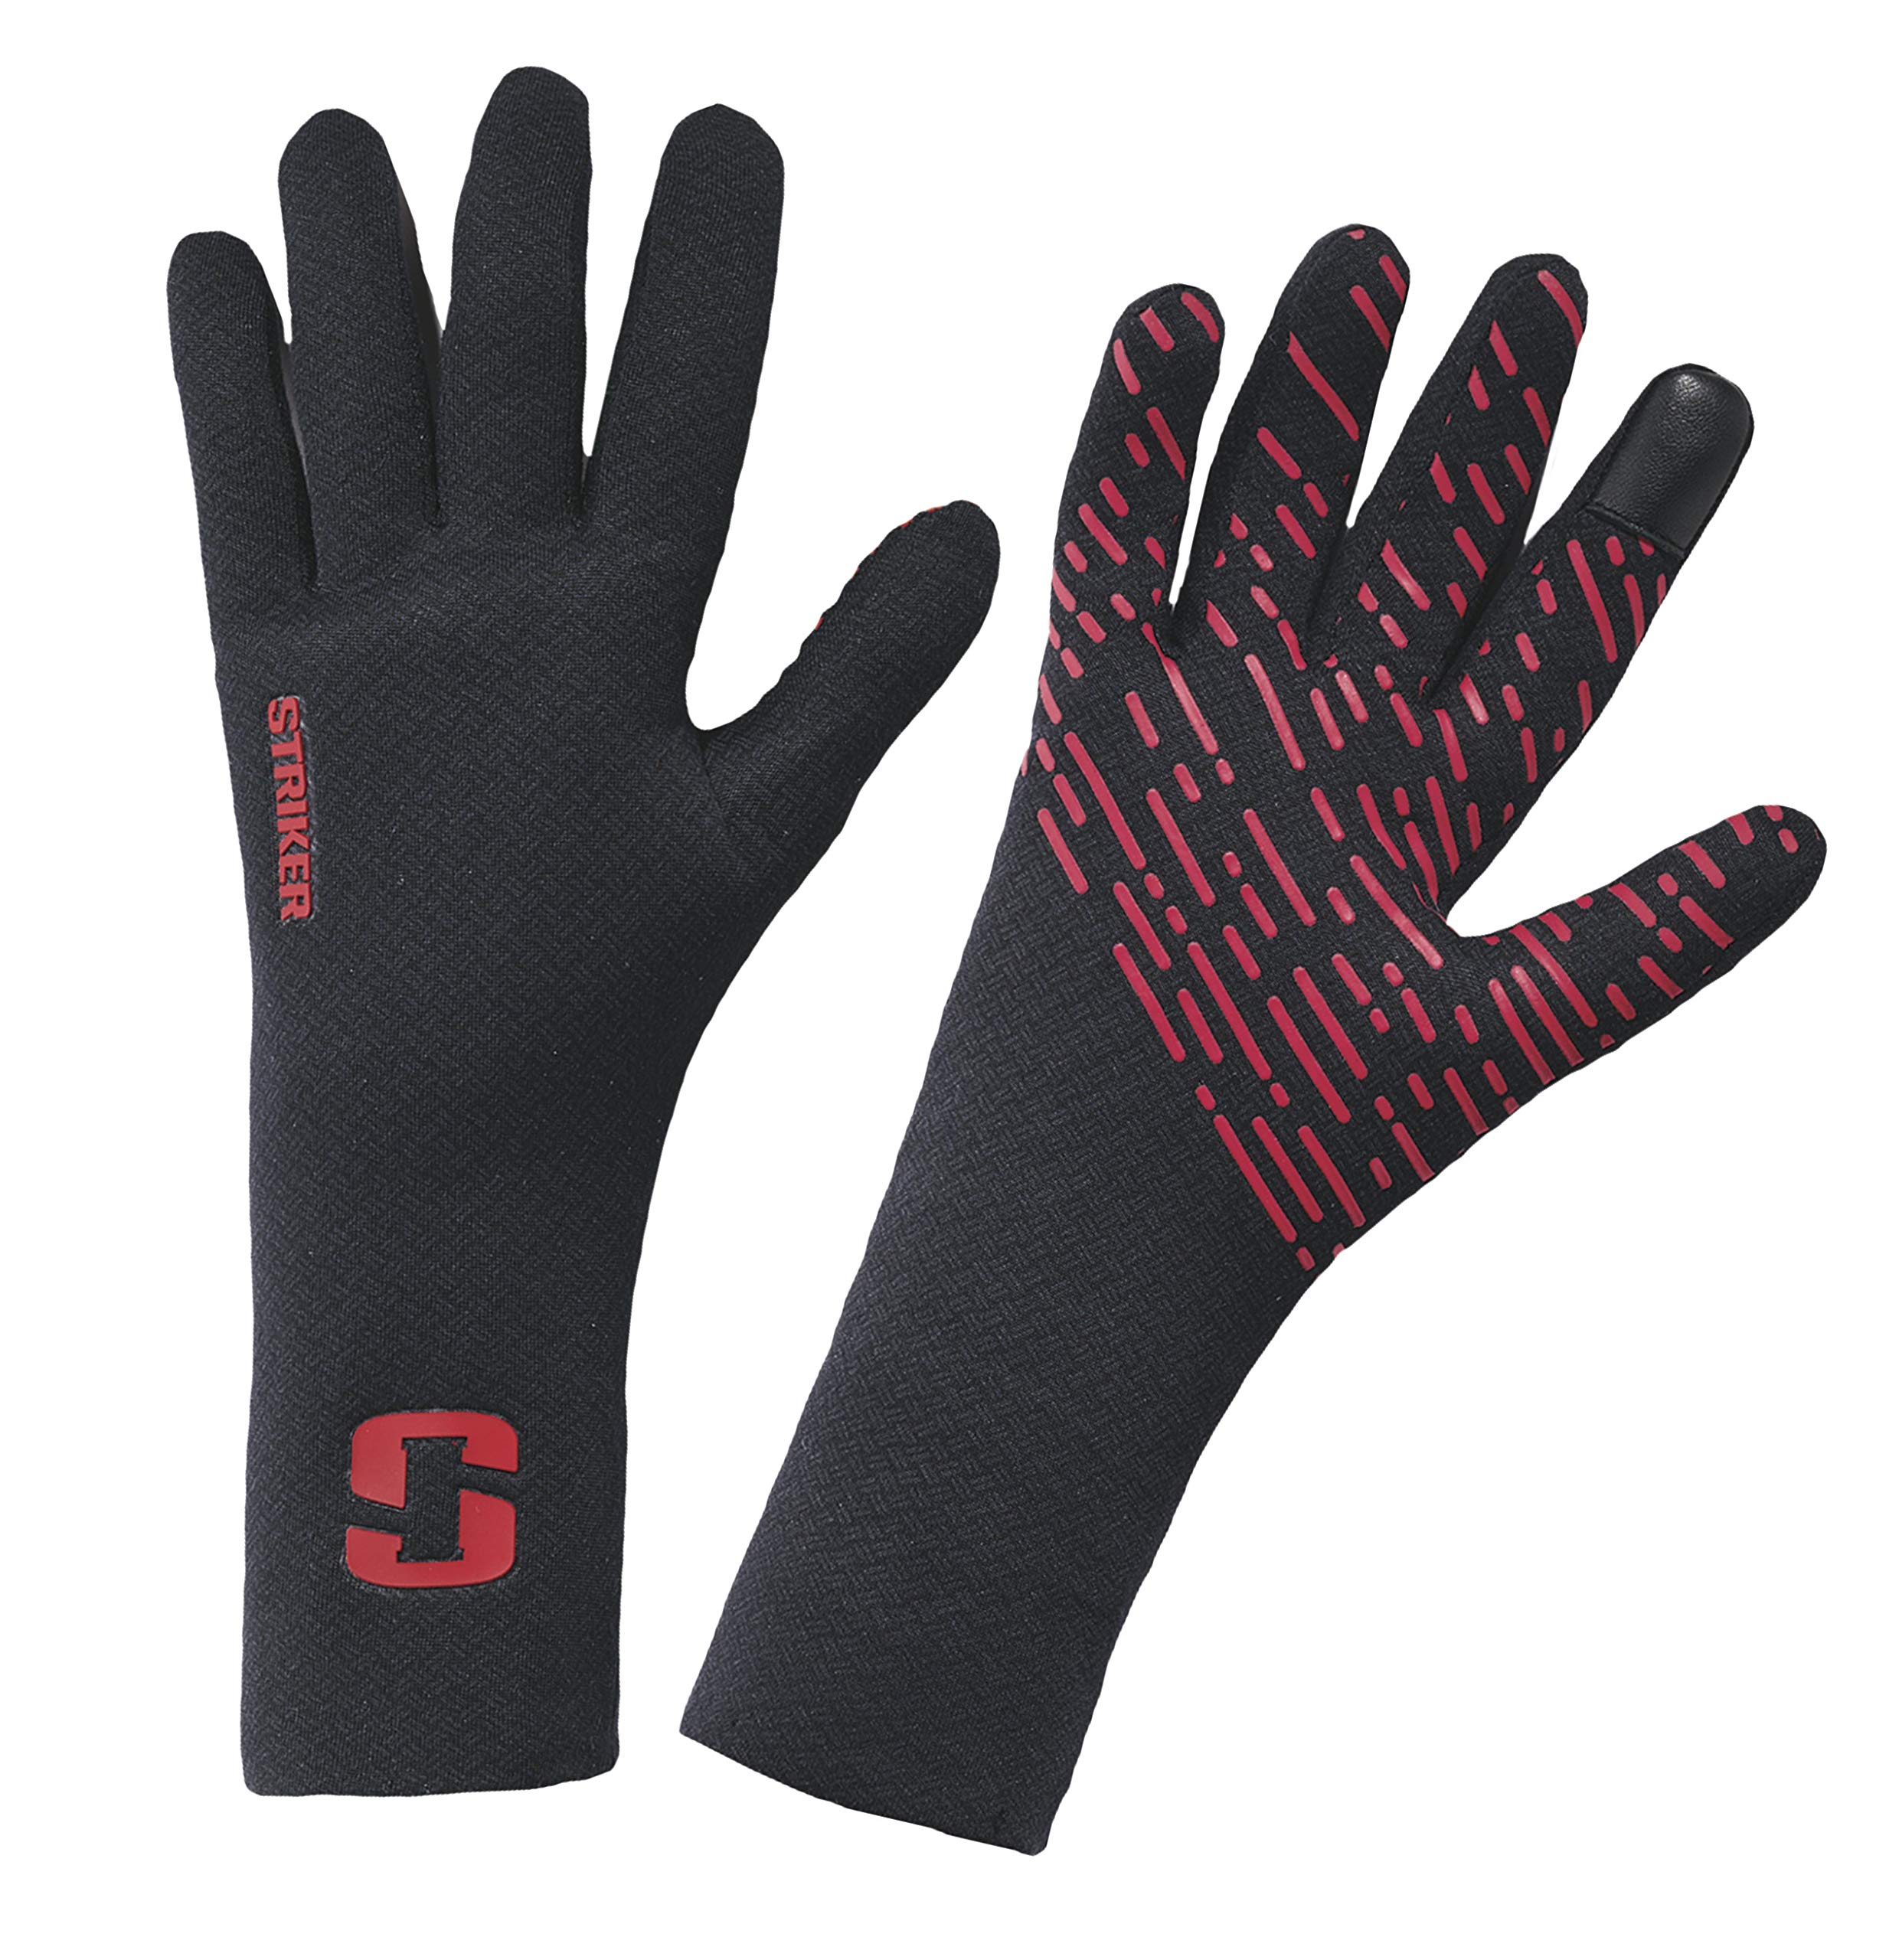 StrikerICE Men's Stealth Fishing Gloves, Waterproof Gloves with Tech-Touch  Fingertips